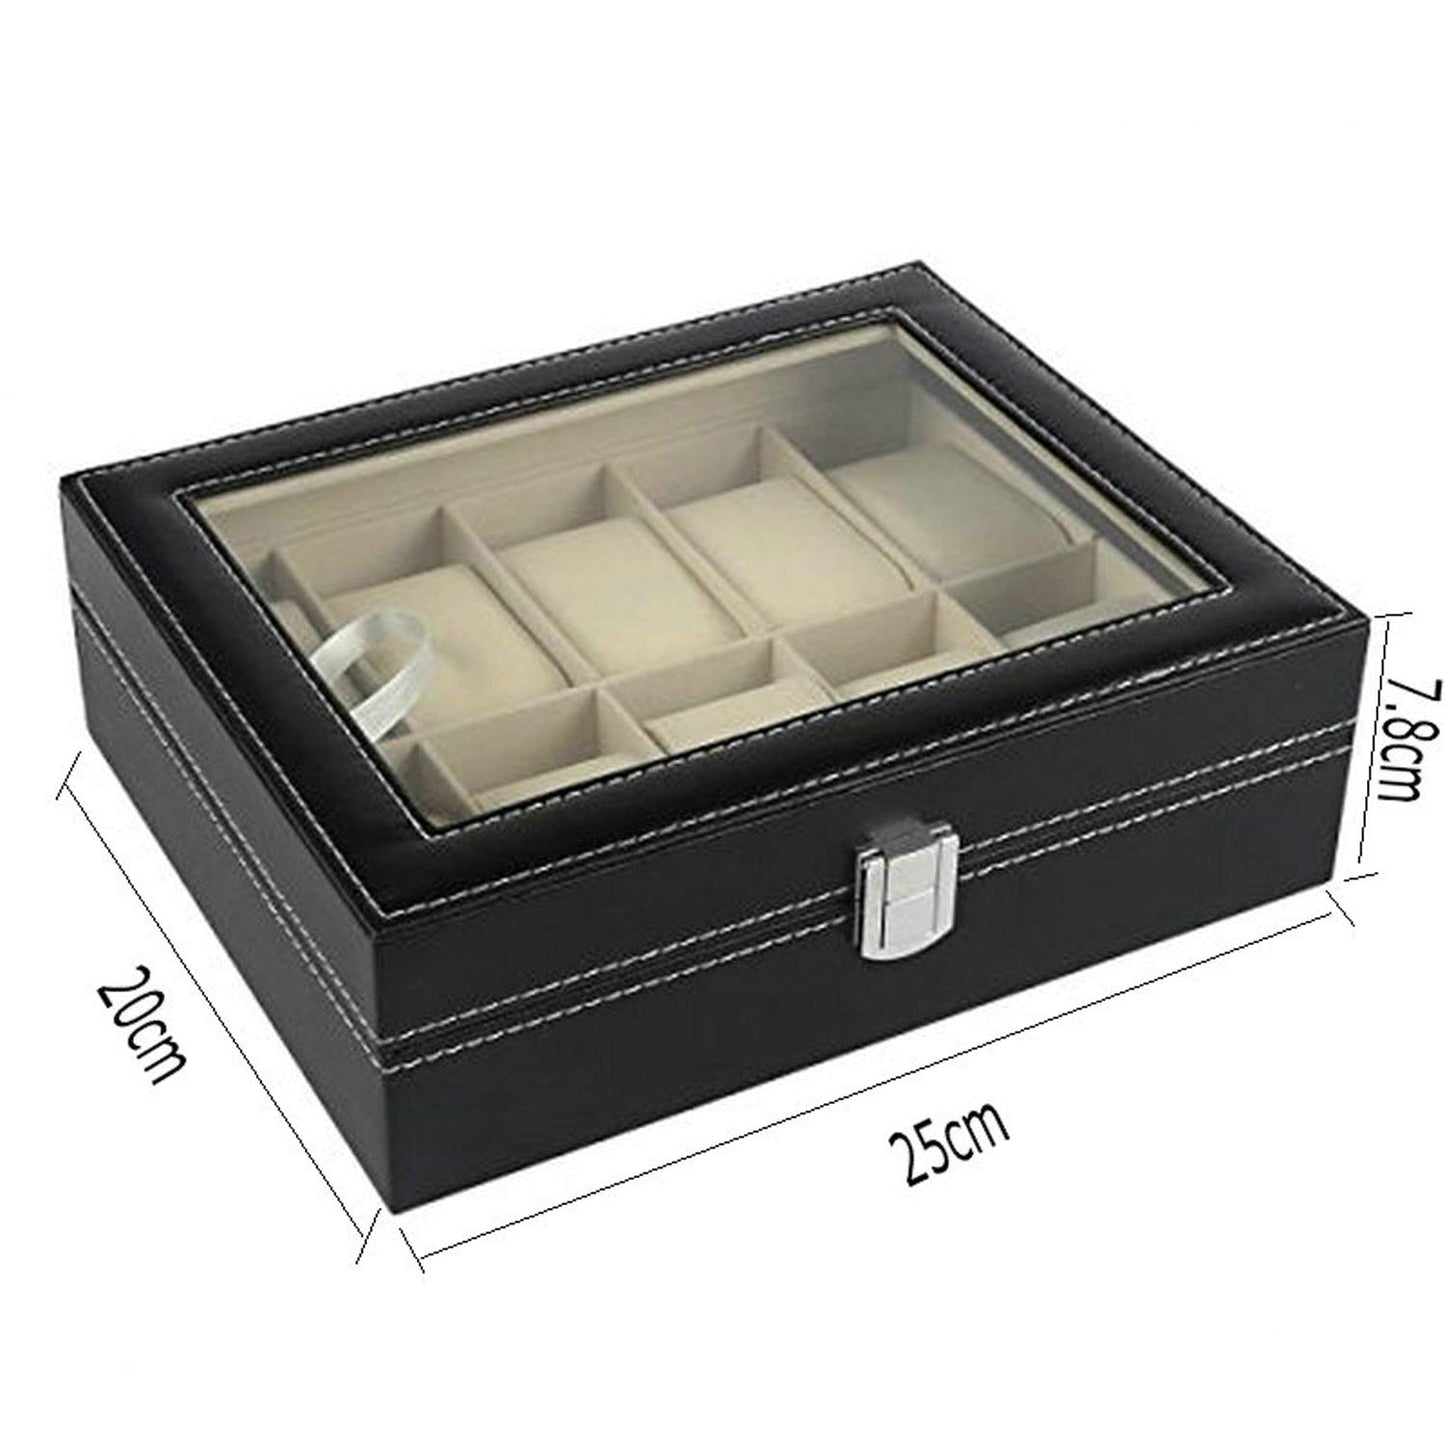 Watch Box 10 Slot for Pu Leather Design Display Case, Black